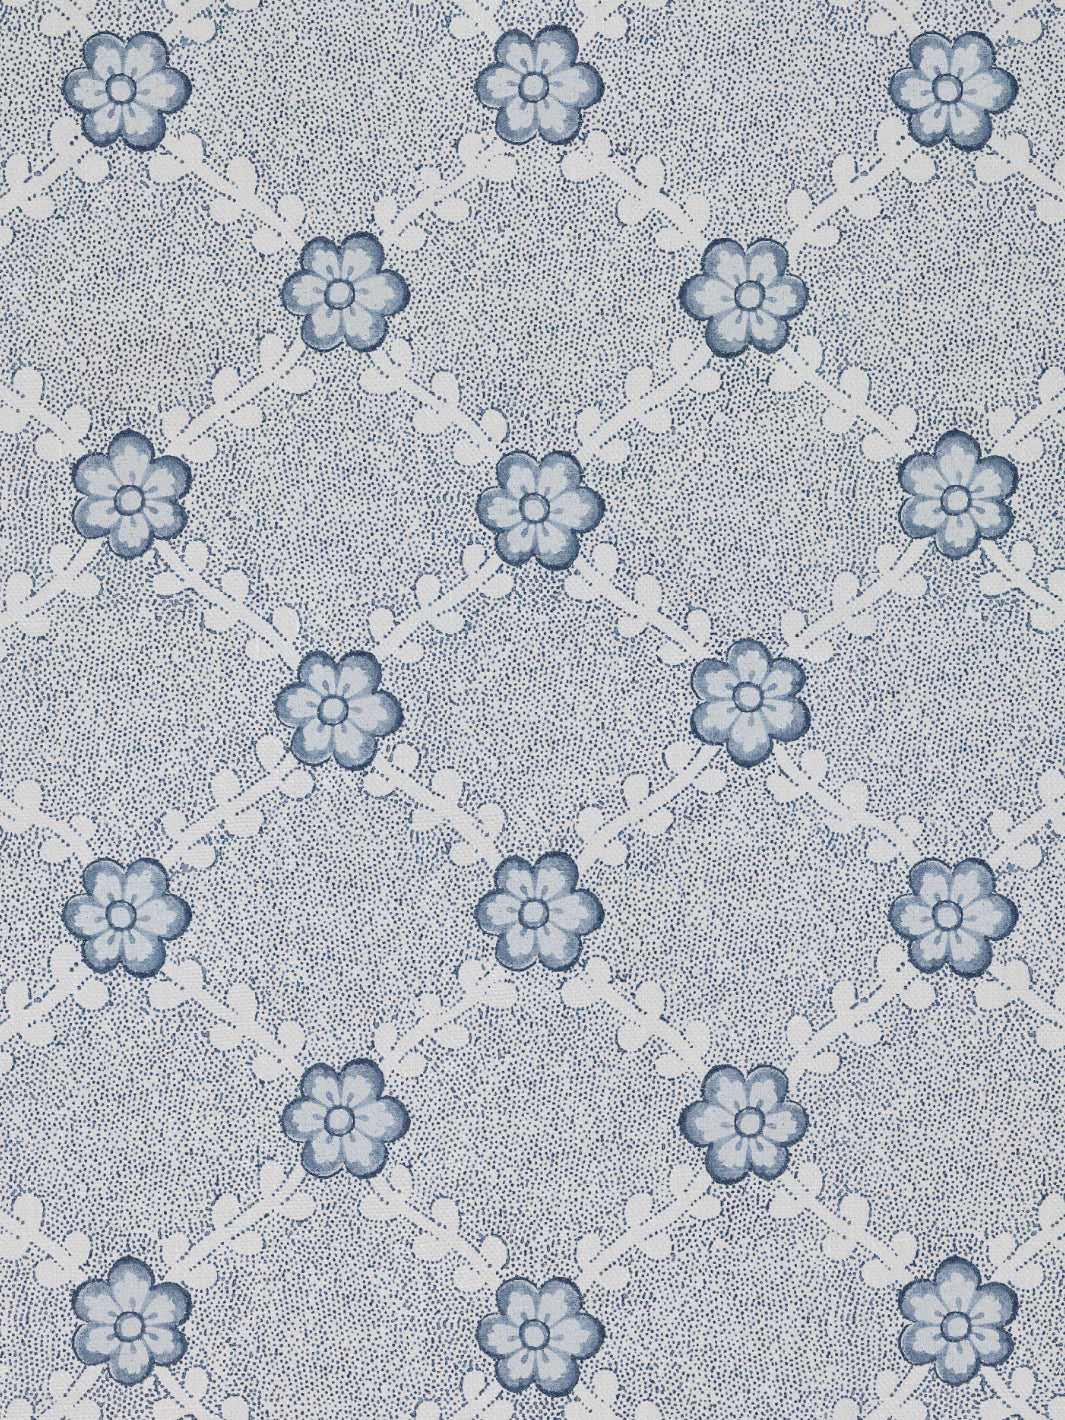 'Lucia' Linen Fabric by Nathan Turner - Dark Blue